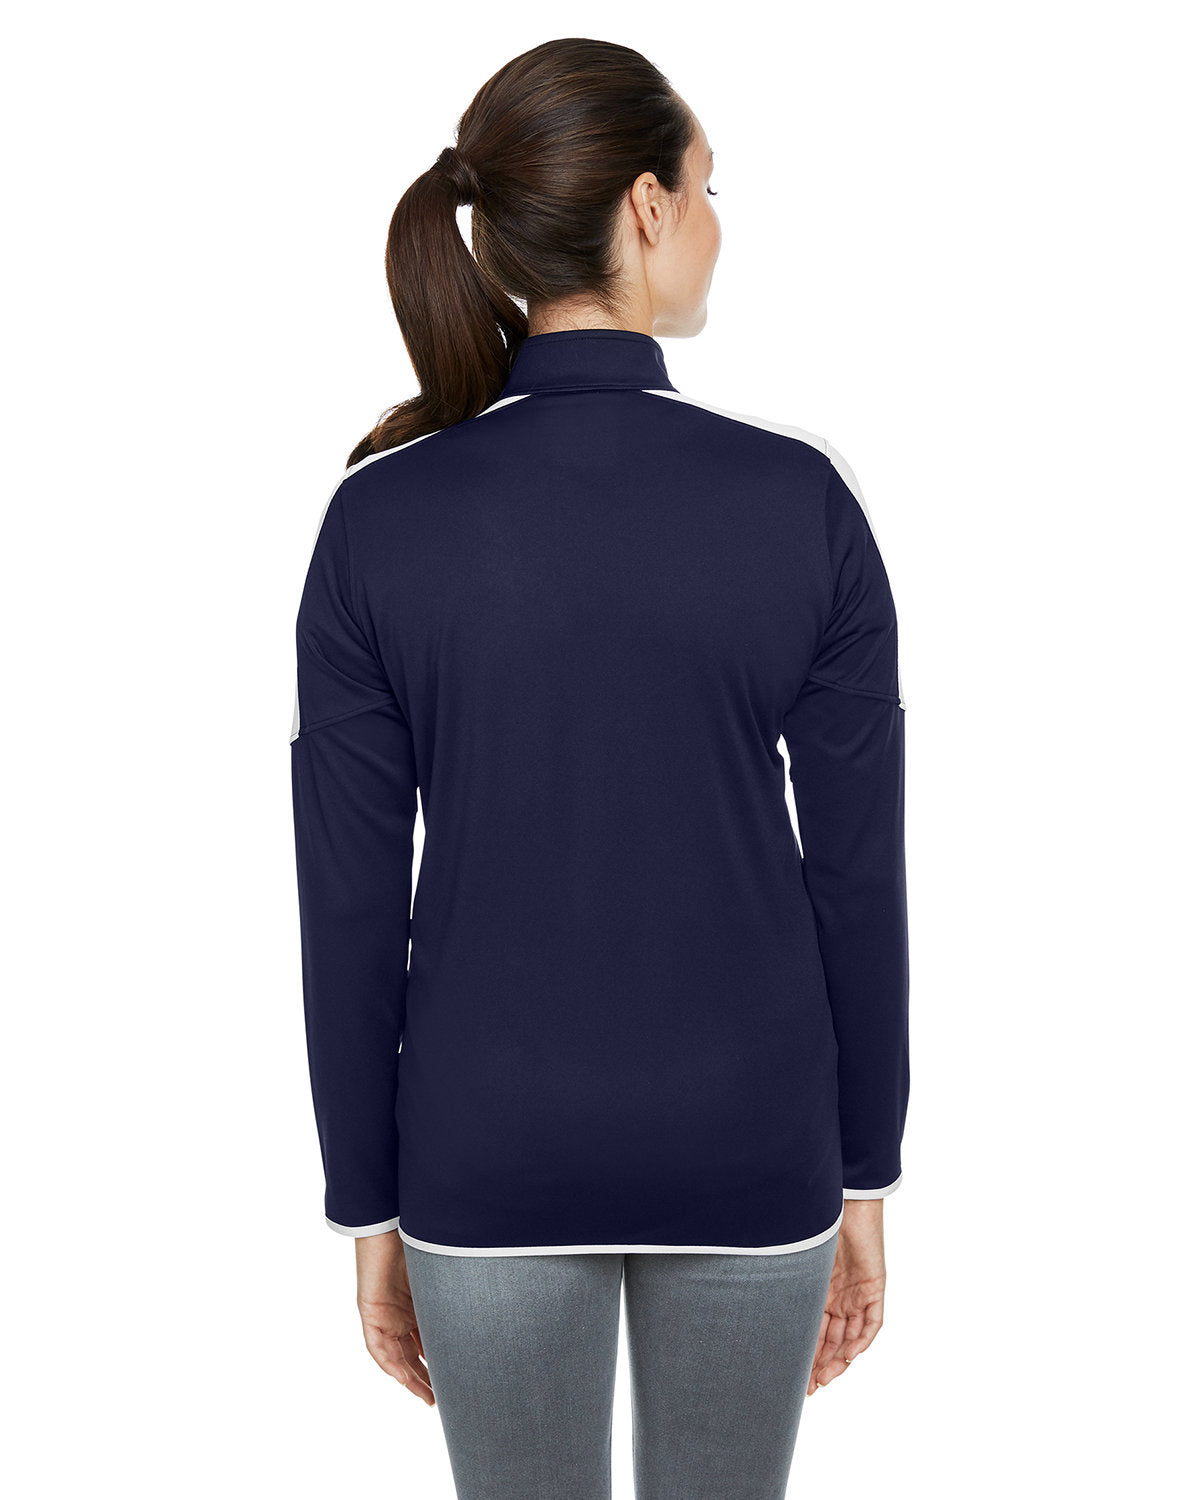 Under Armour Ladies Rival Knit Branded Jackets, Midnight Navy